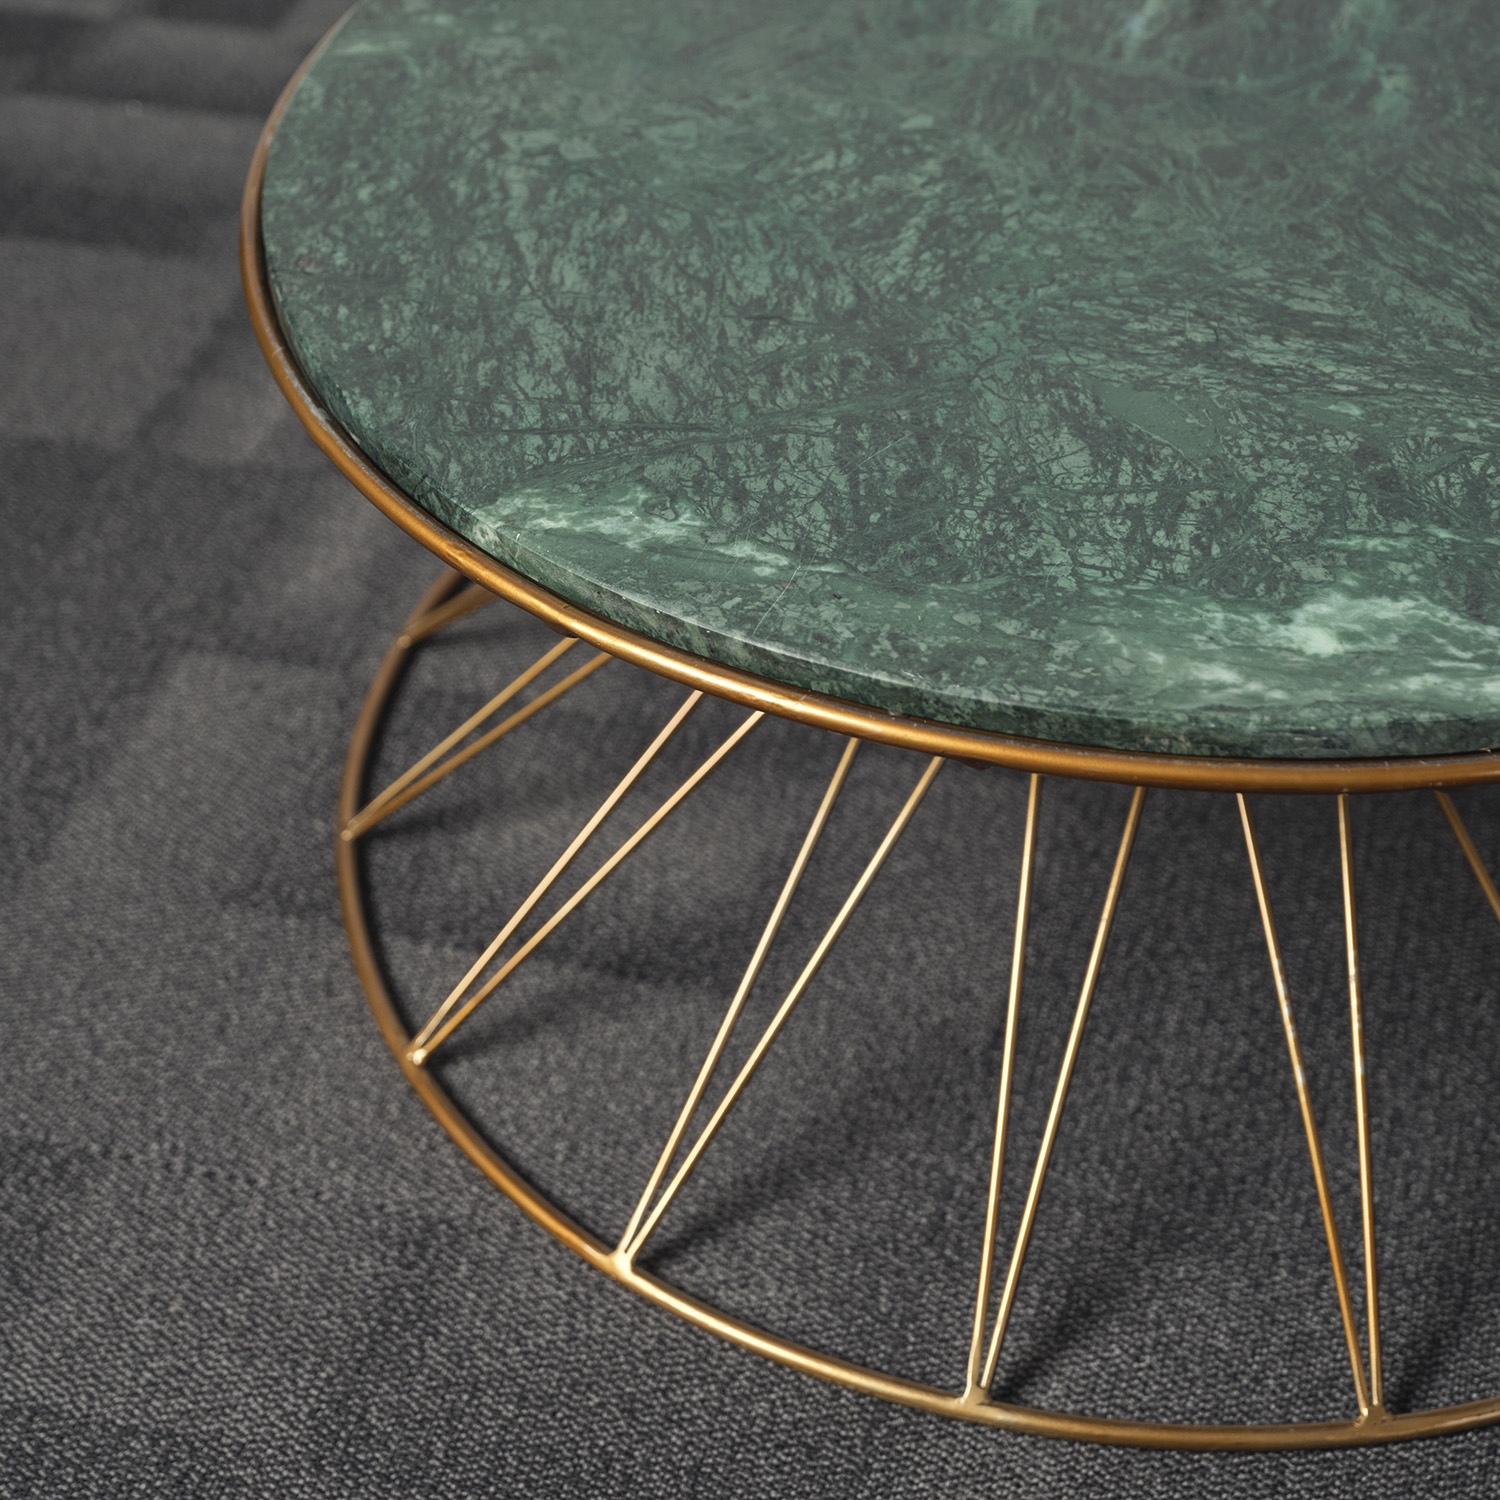 Round, side table with a green marble top and woven brass frame